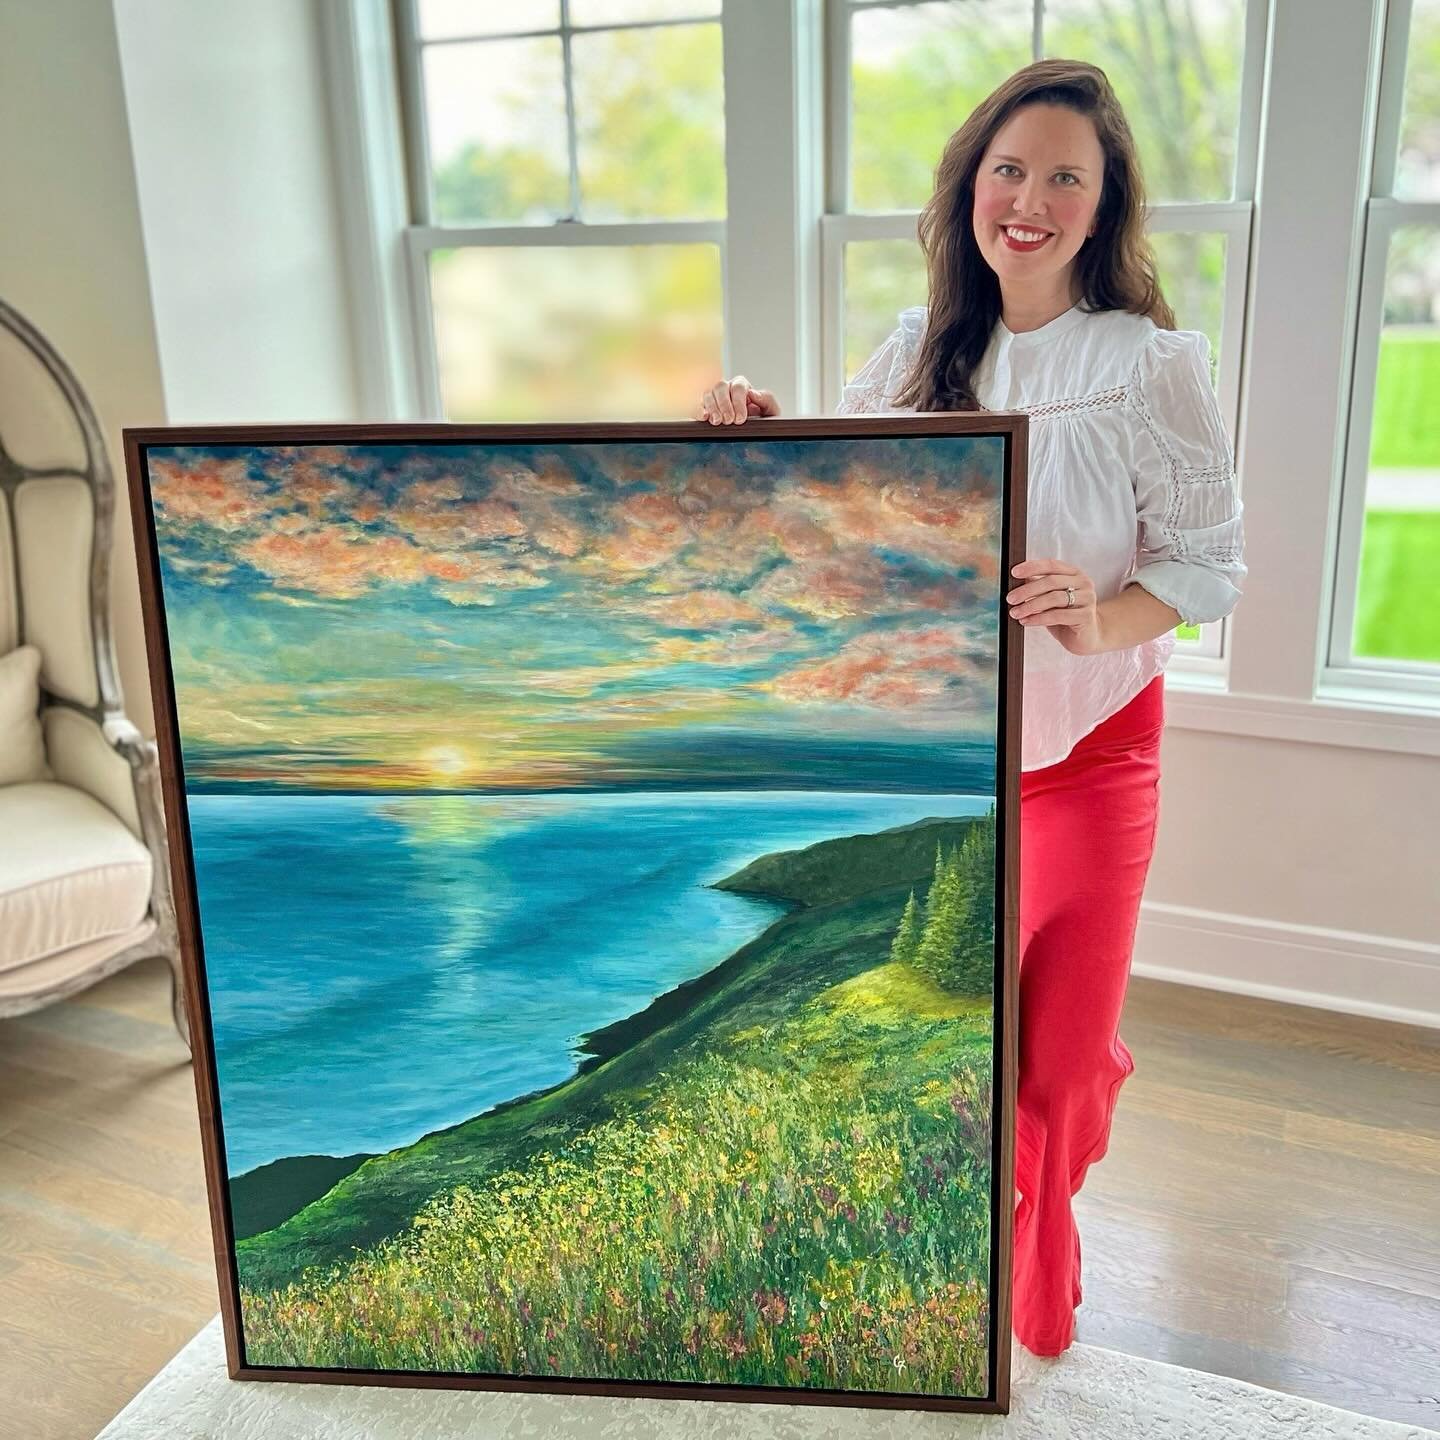 🌊 Big Sur🌲
Helping create pieces that evoke wonderful memories has to be one of the coolest perks of being an artist. Thank you @jamiebizzell &amp; @j.r.bizzell for commissioning this piece.  I was honored to paint this serene scene from photos tak